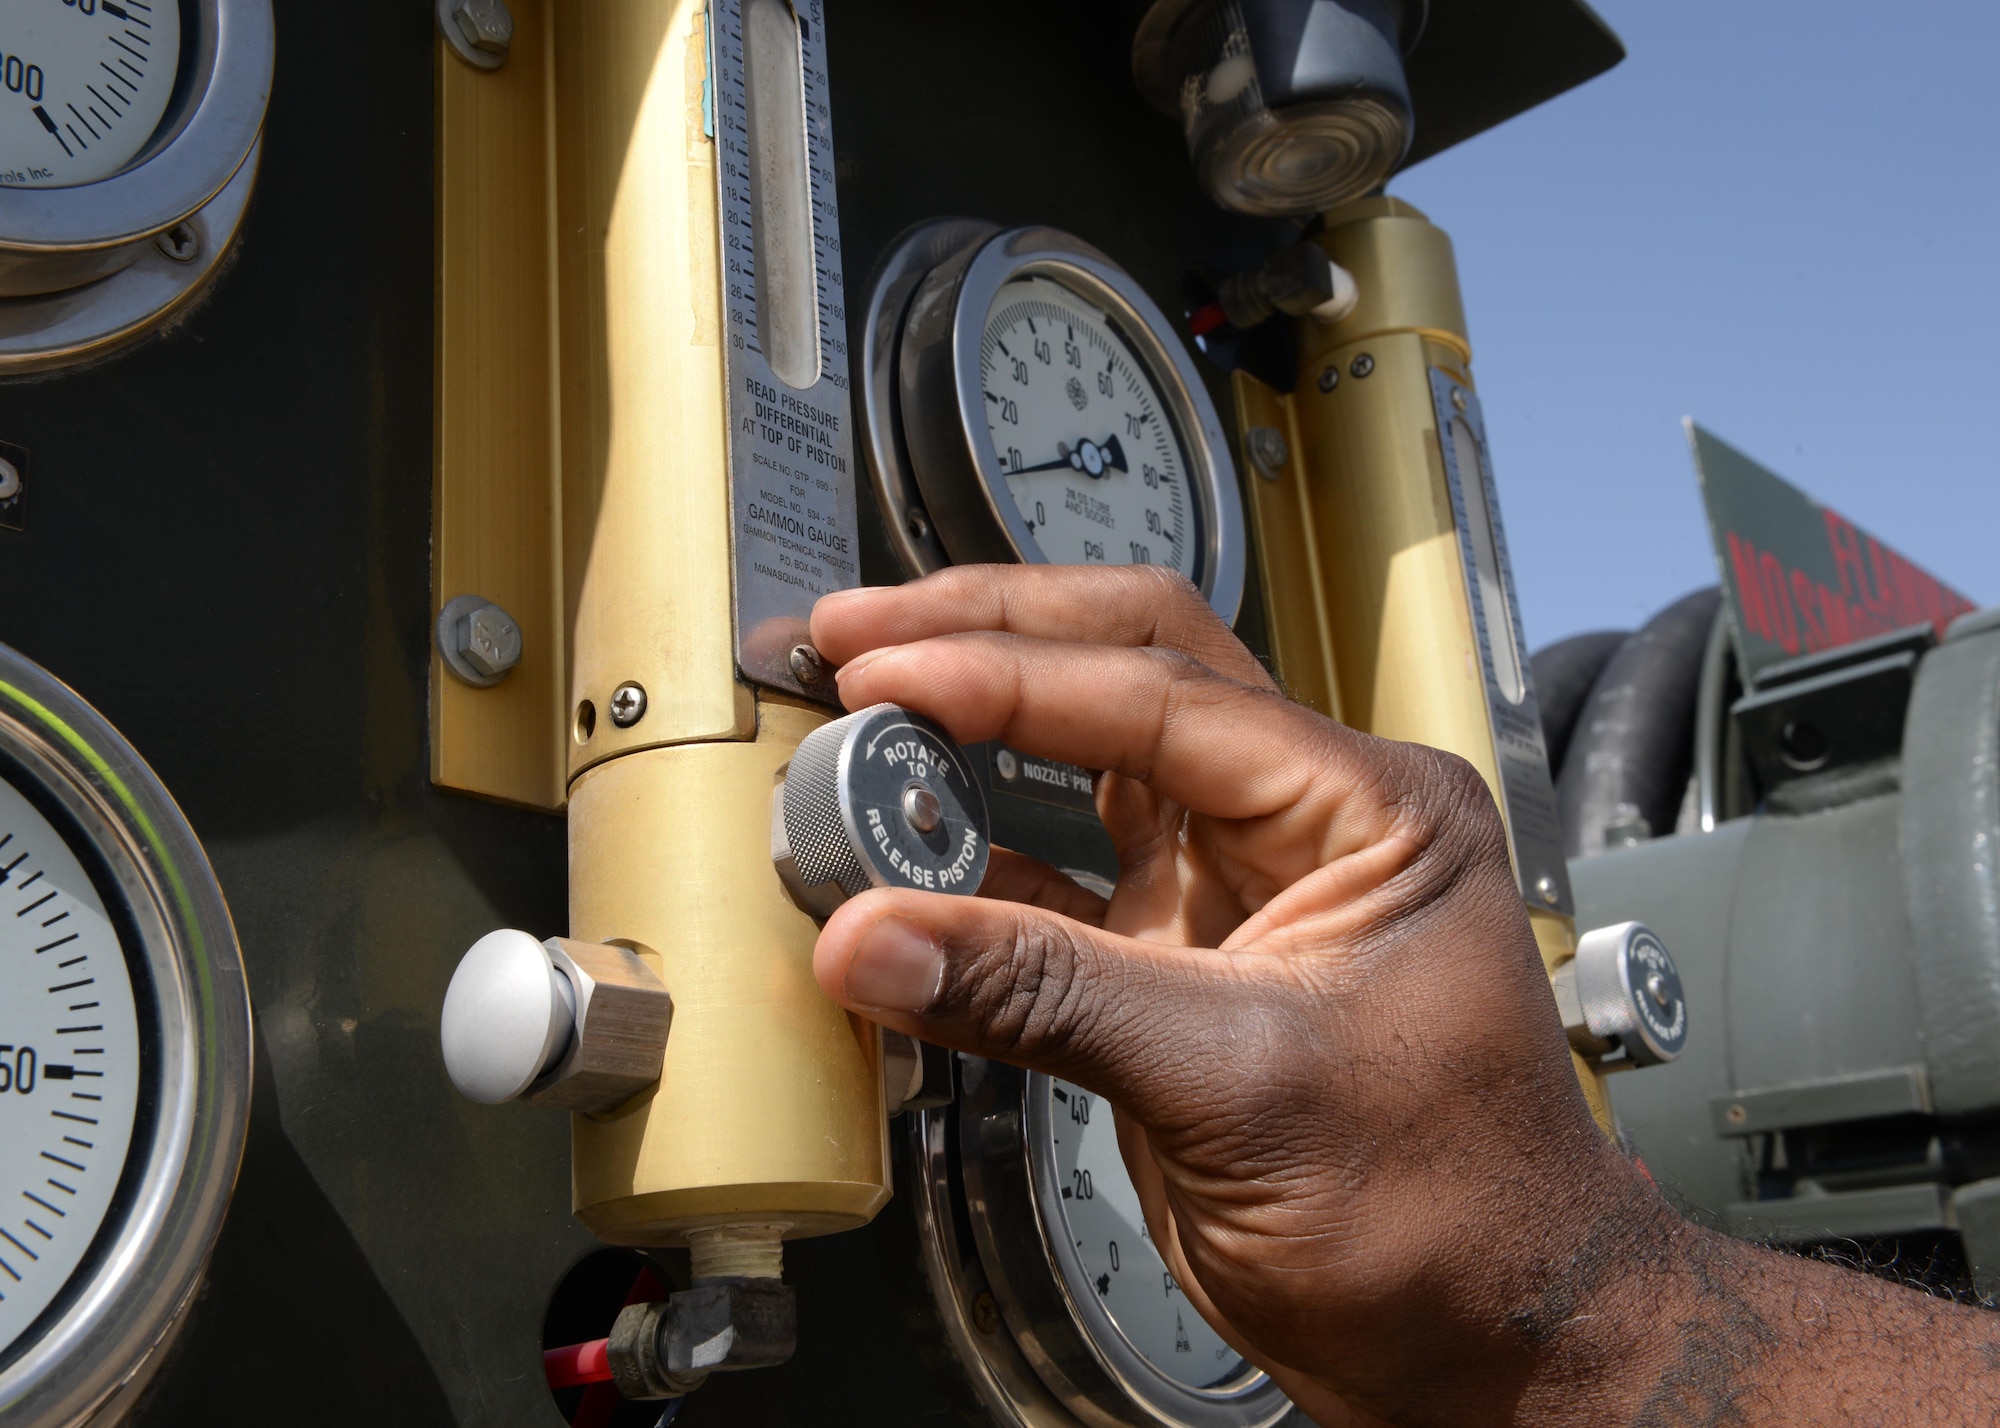 John Jackson, 455th Logistics Readiness Squadron fuels technician, prepares to fuel an aircraft using an R-12 hydrant system truck Aug. 22, 2015, on Bagram Airfield, Afghanistan. Jackson is a contractor with the Ingenuity and Purpose contracting company and is responsible for fueling all aircraft that come to and from Bagram. (U.S. Air Force photo by Senior Airman Cierra Presentado/Released)